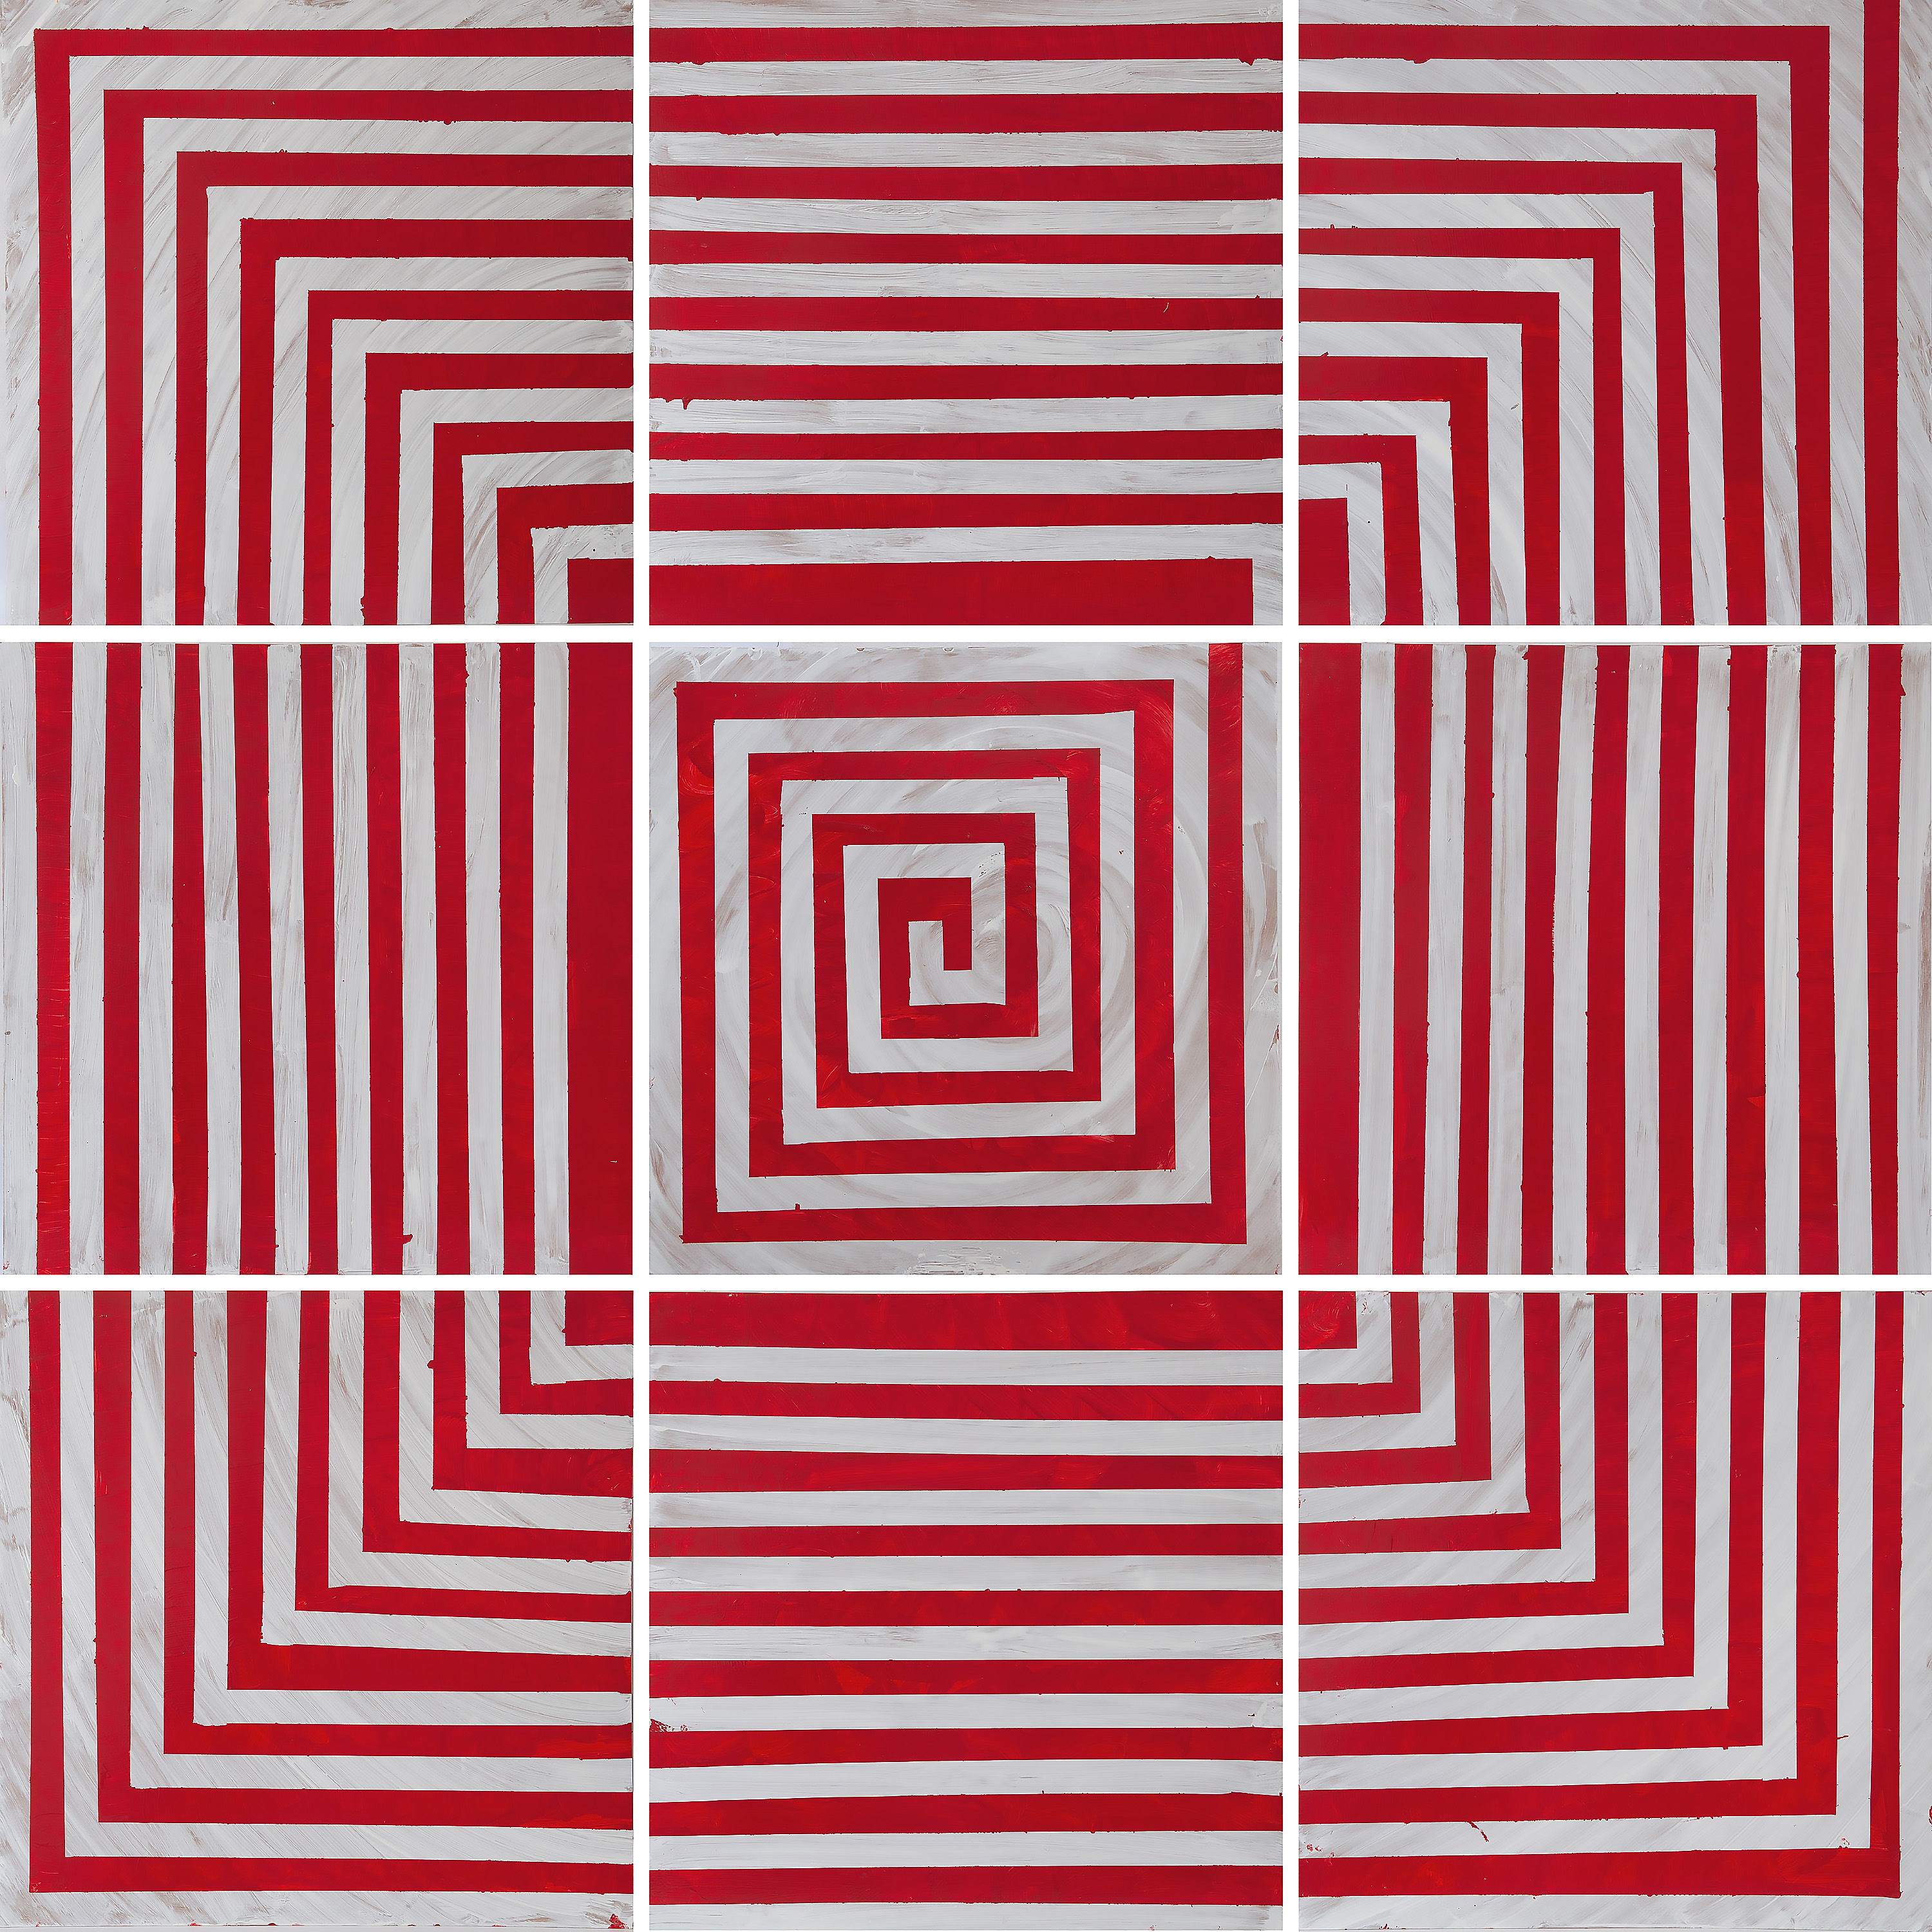 Red-quadrospiral from series EmoGeo